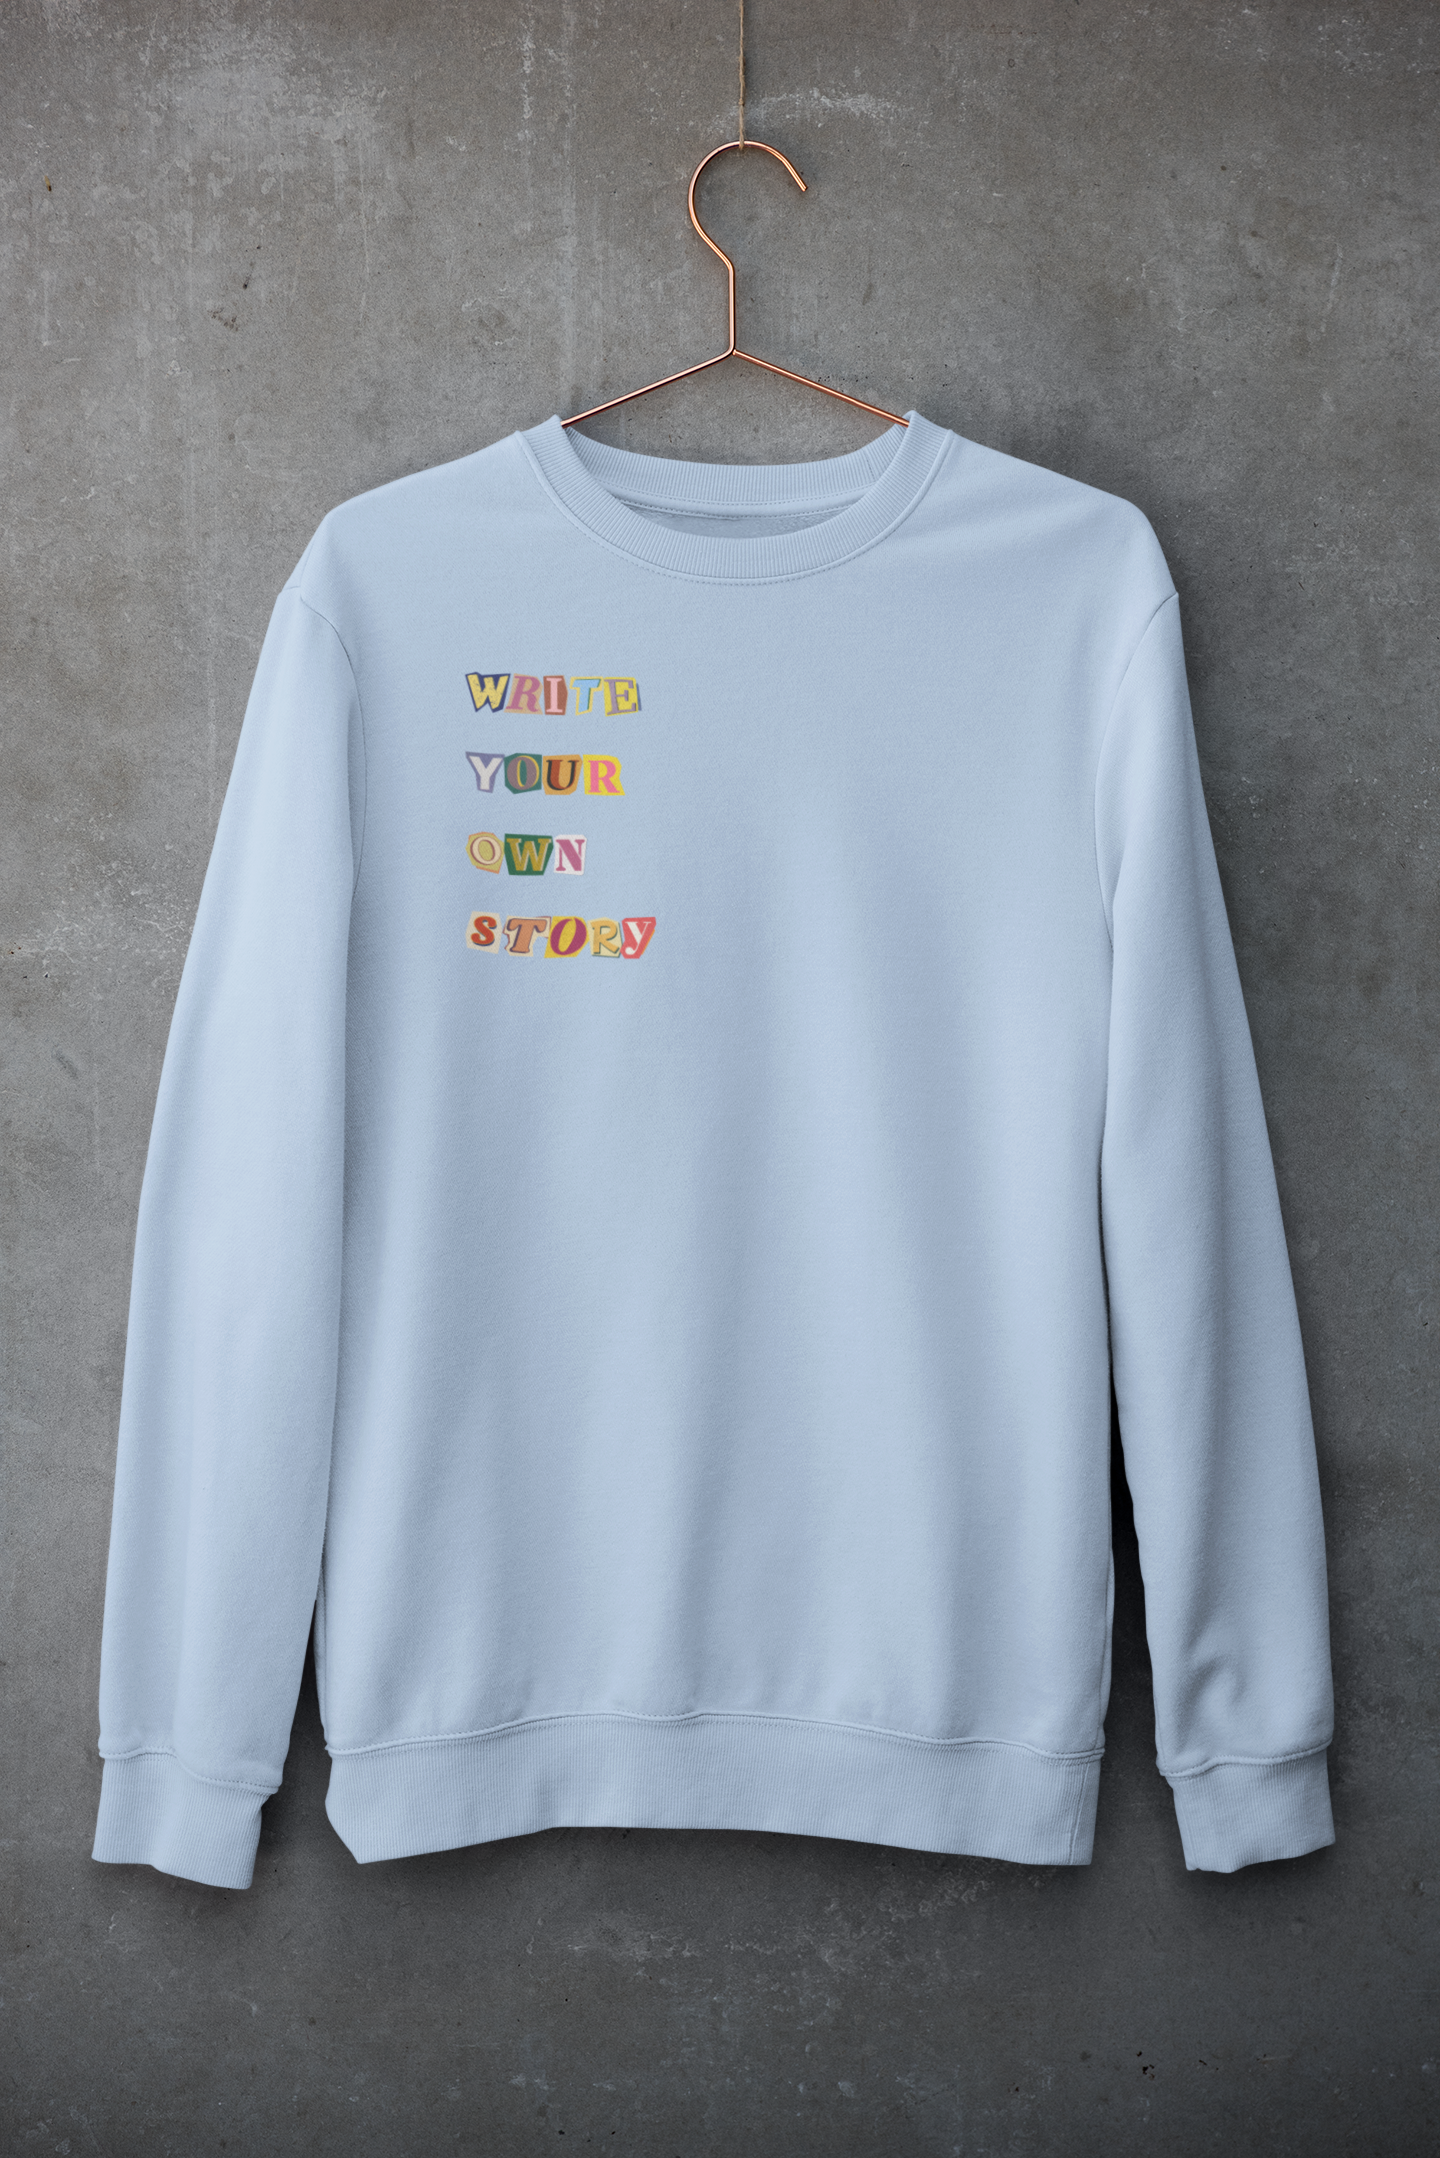 'Write Your Own Story' Crewneck